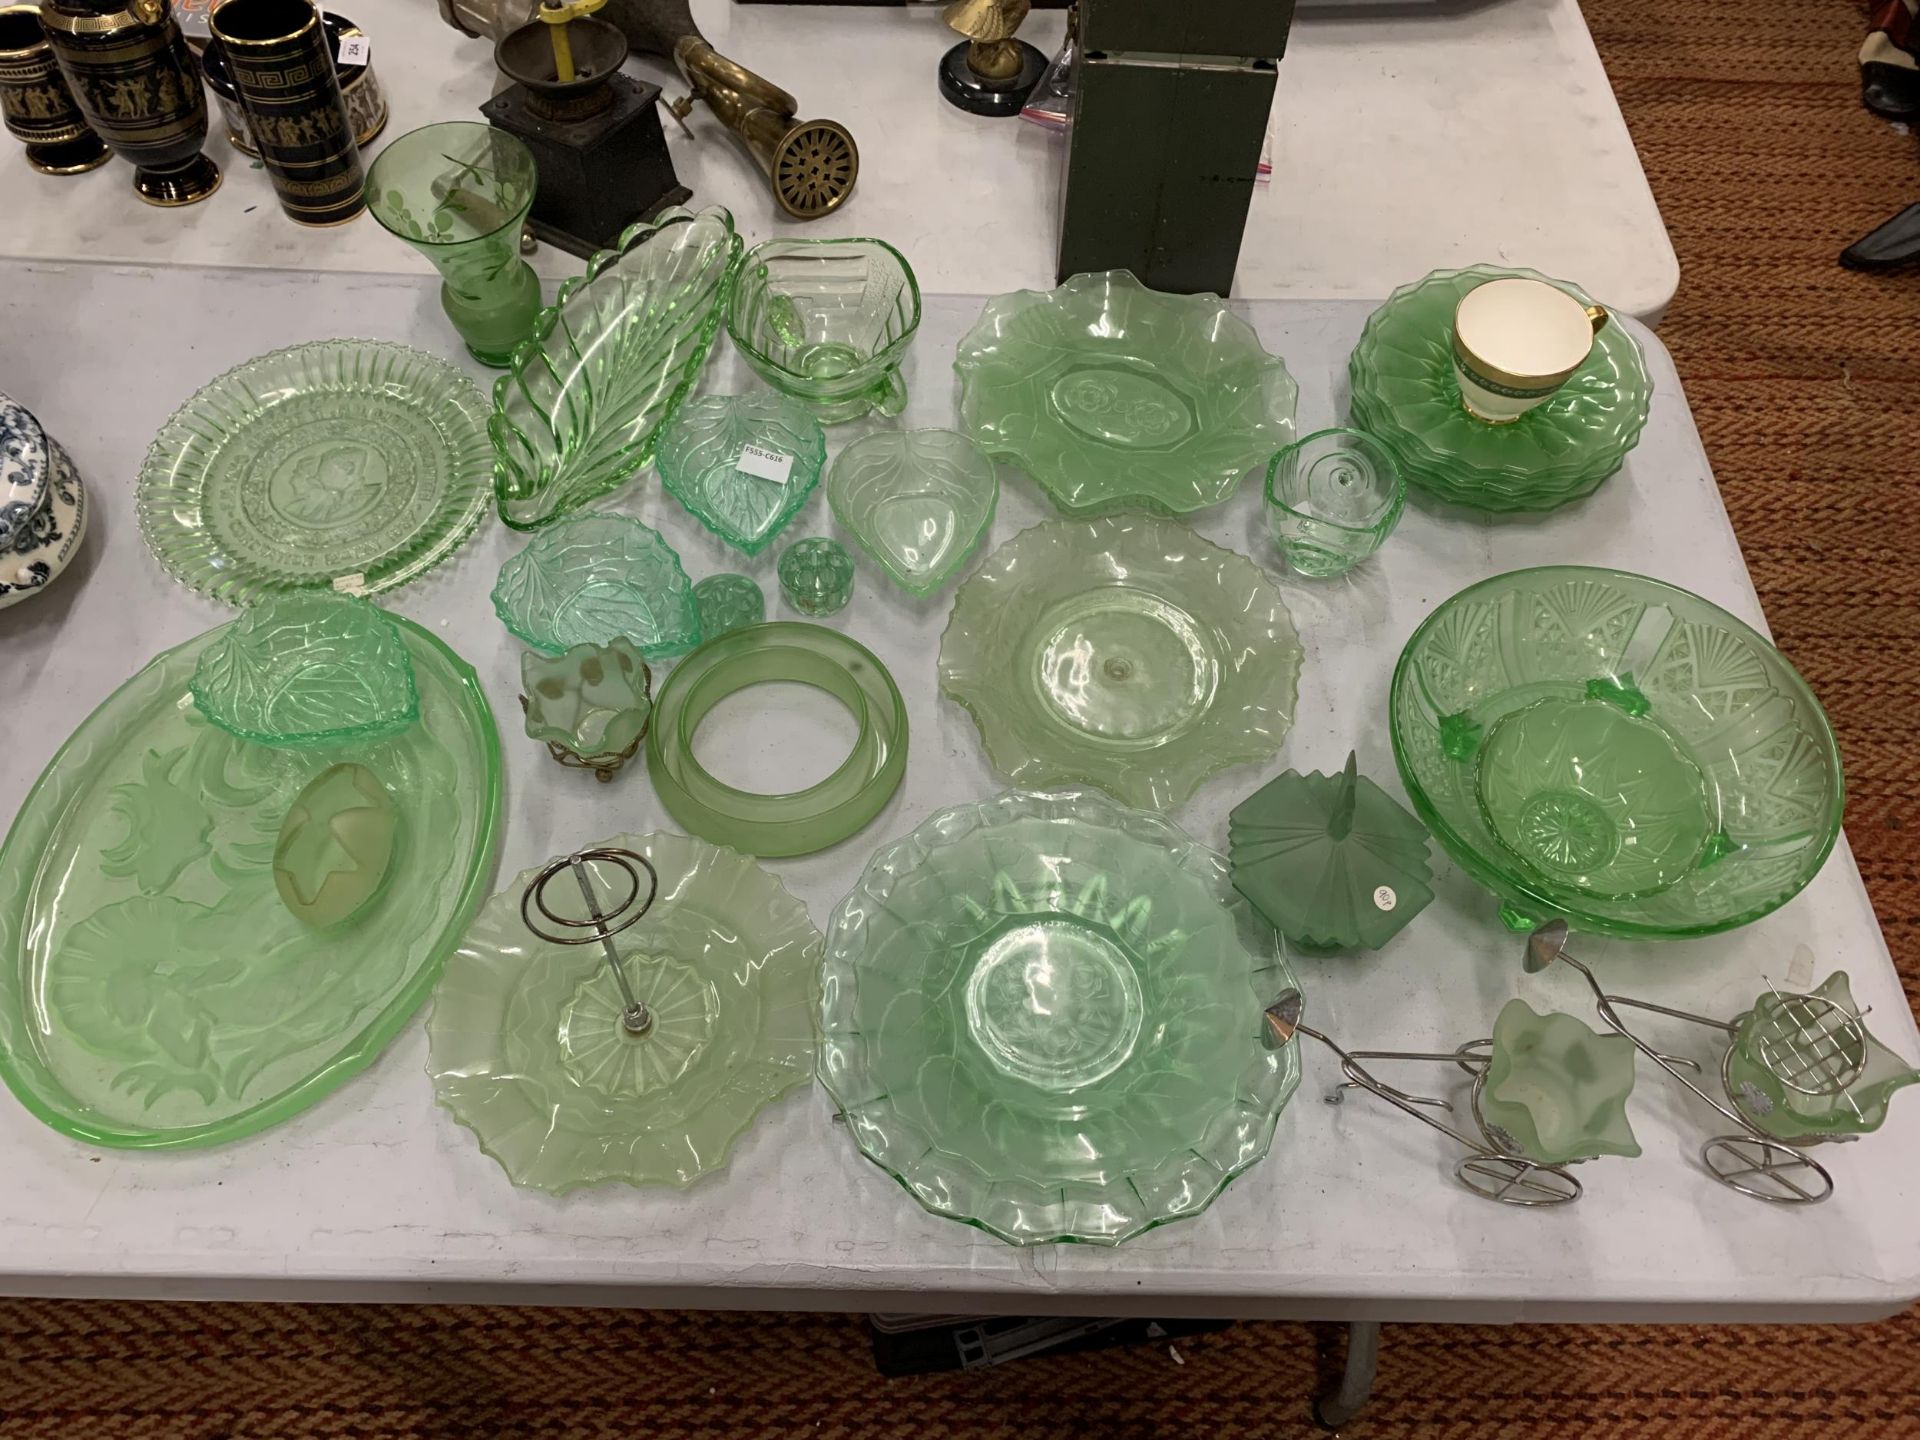 A LARGE AMOUNT OF GREEN GLASSWARE TO INCLUDE LEAF SHAPED BOWLS, PATTERNED PLATES, BOWLS, PLATES, ETC